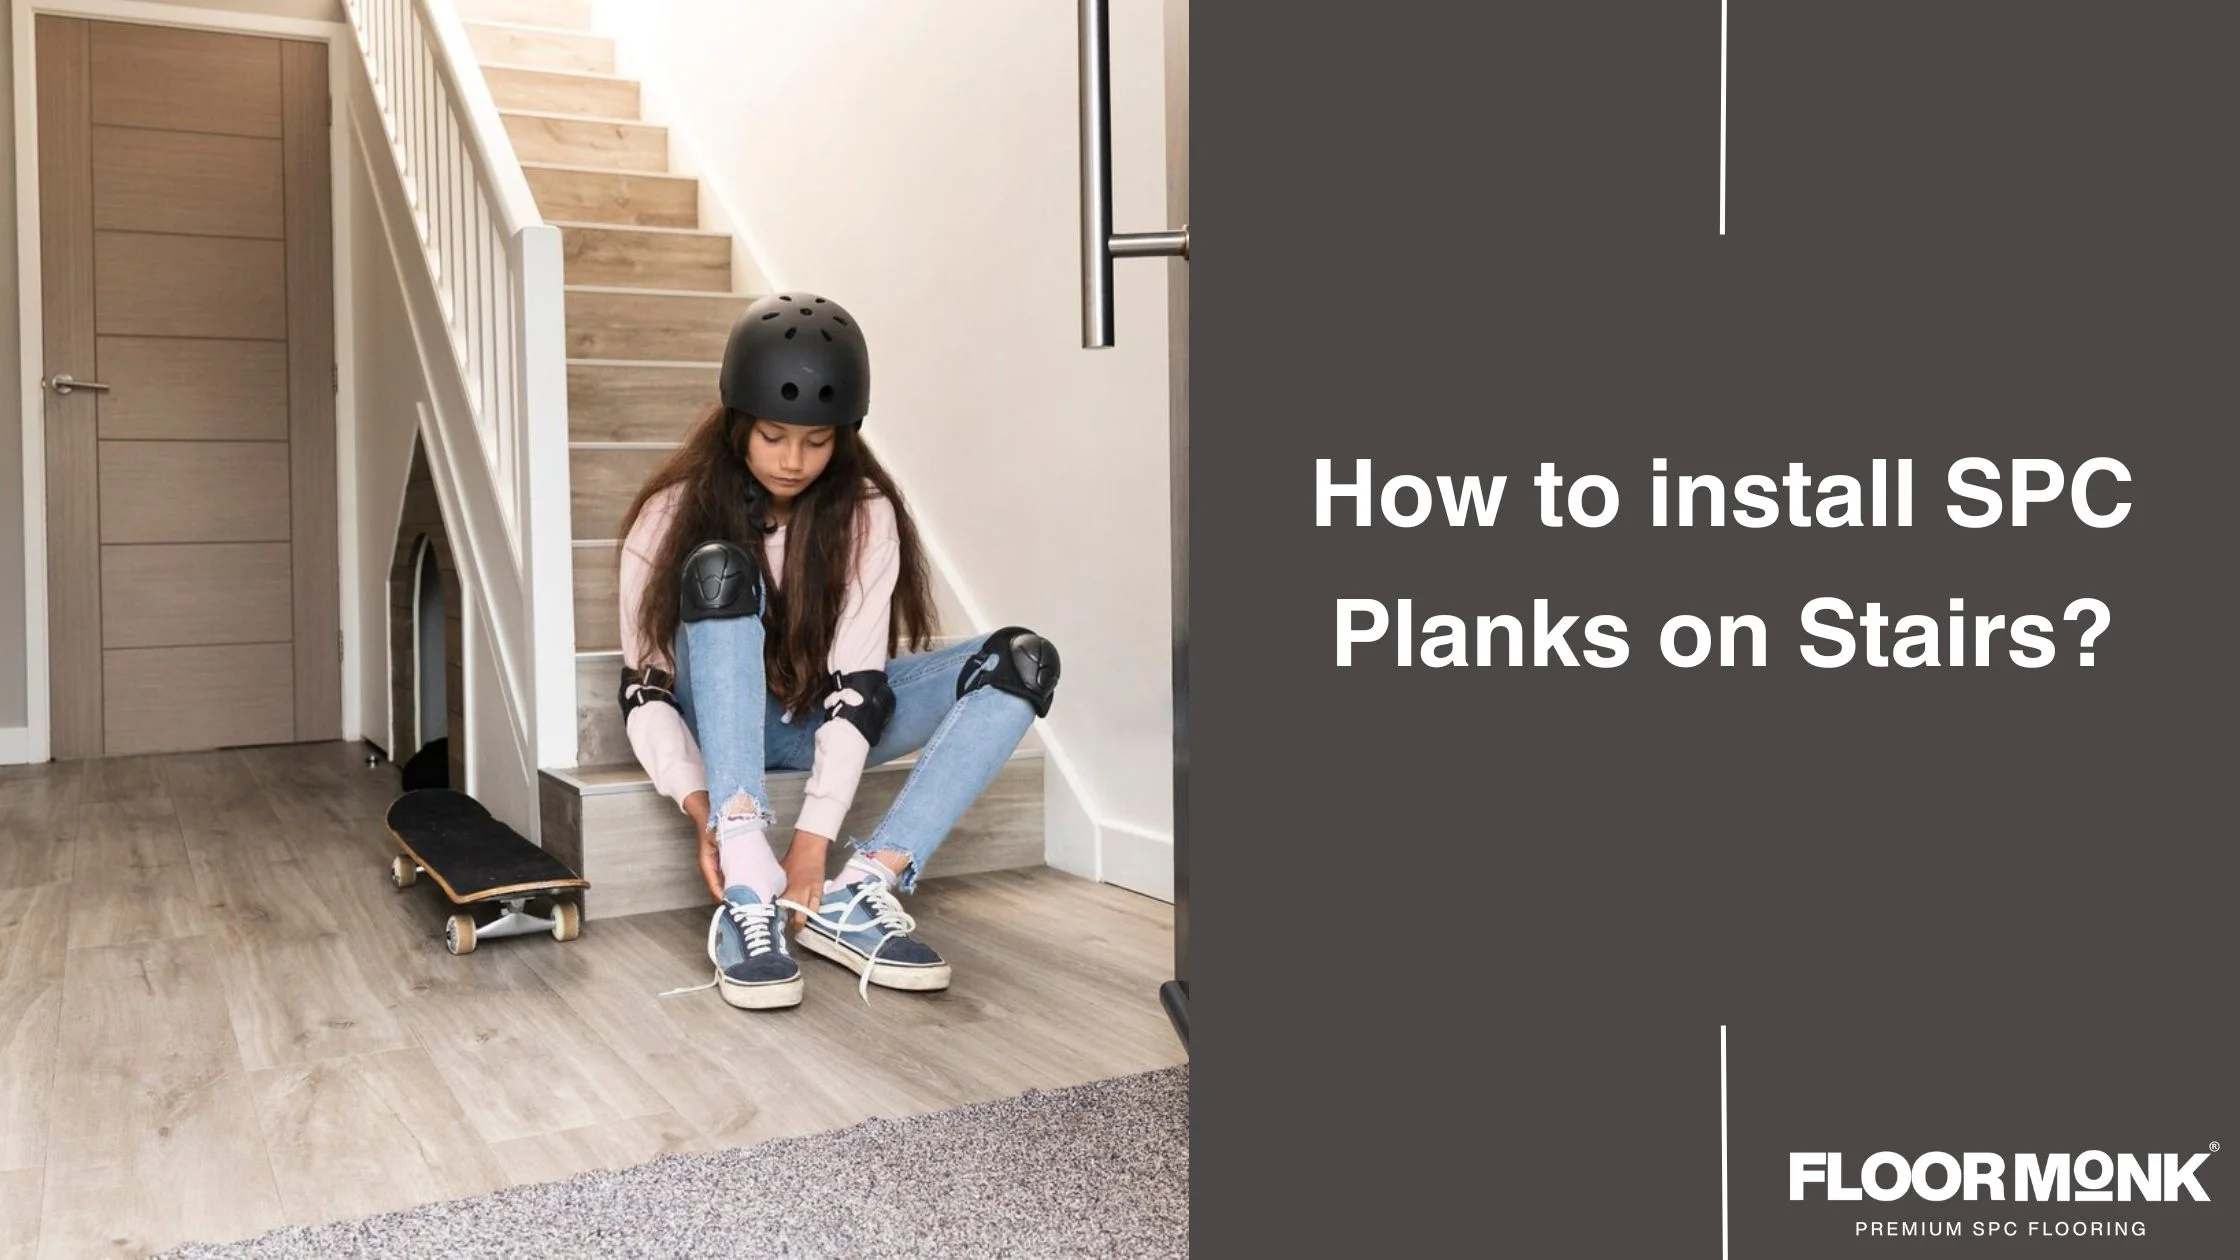 How To Install SPC Planks On Stairs?